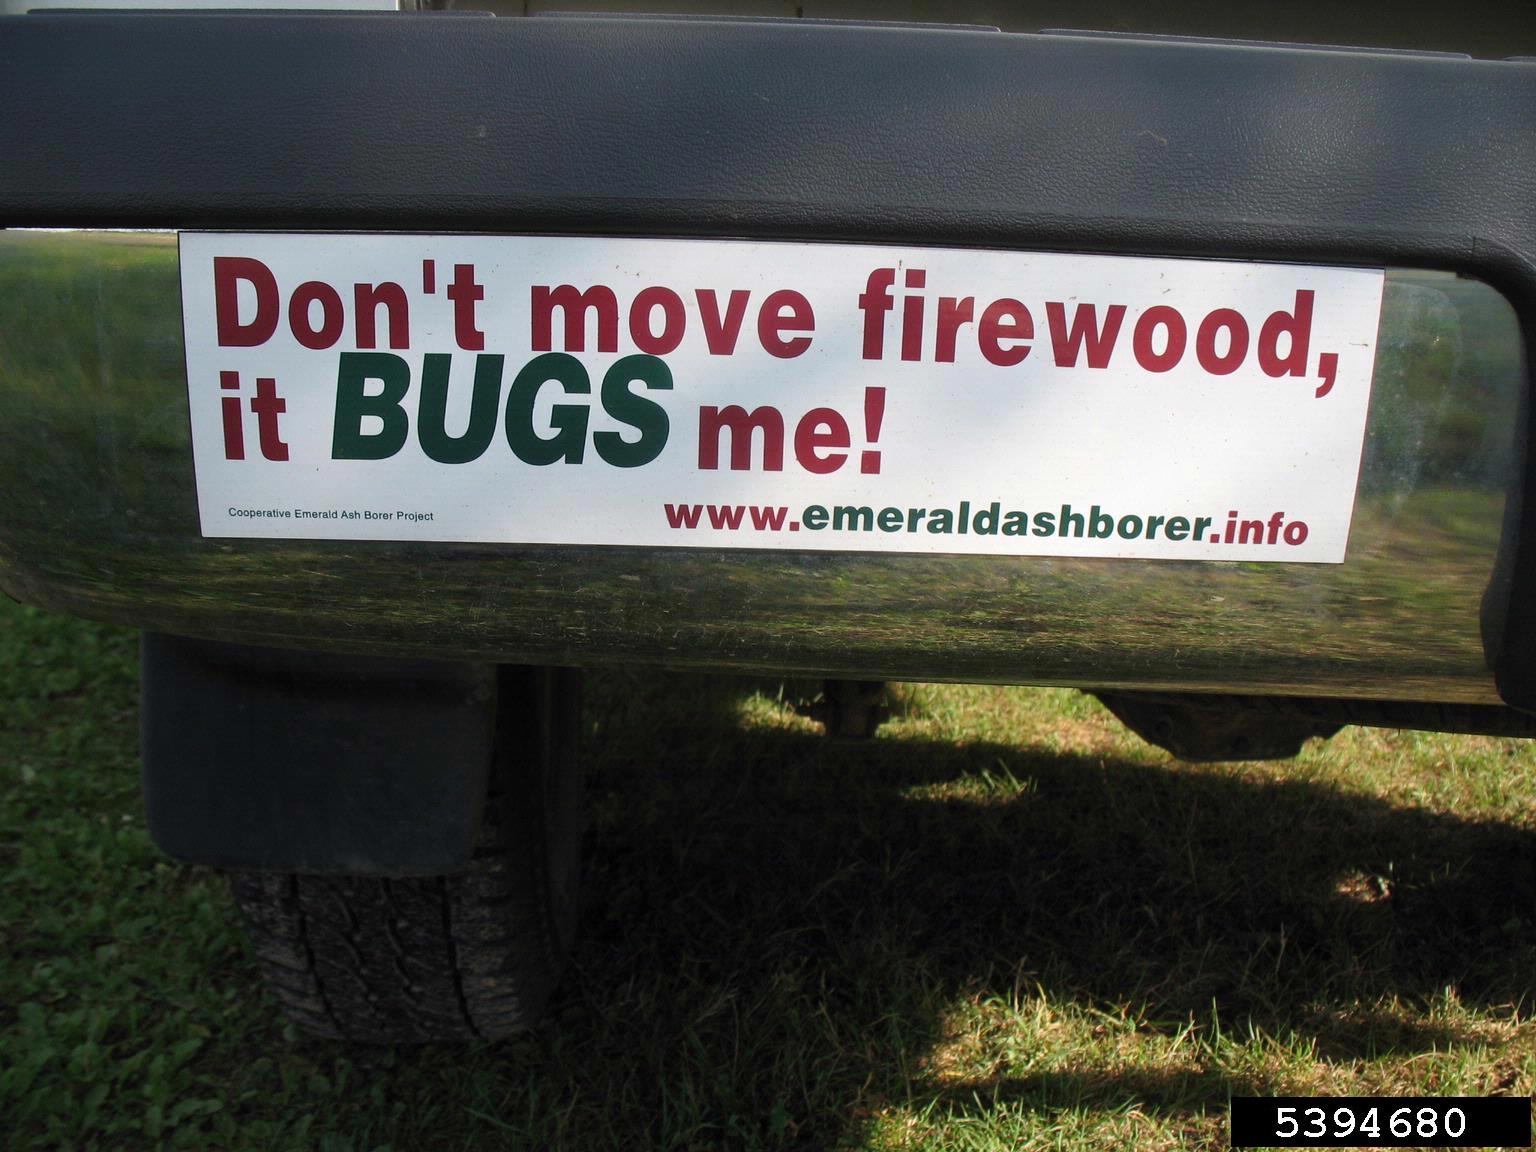 Don't Move Firewood campaign